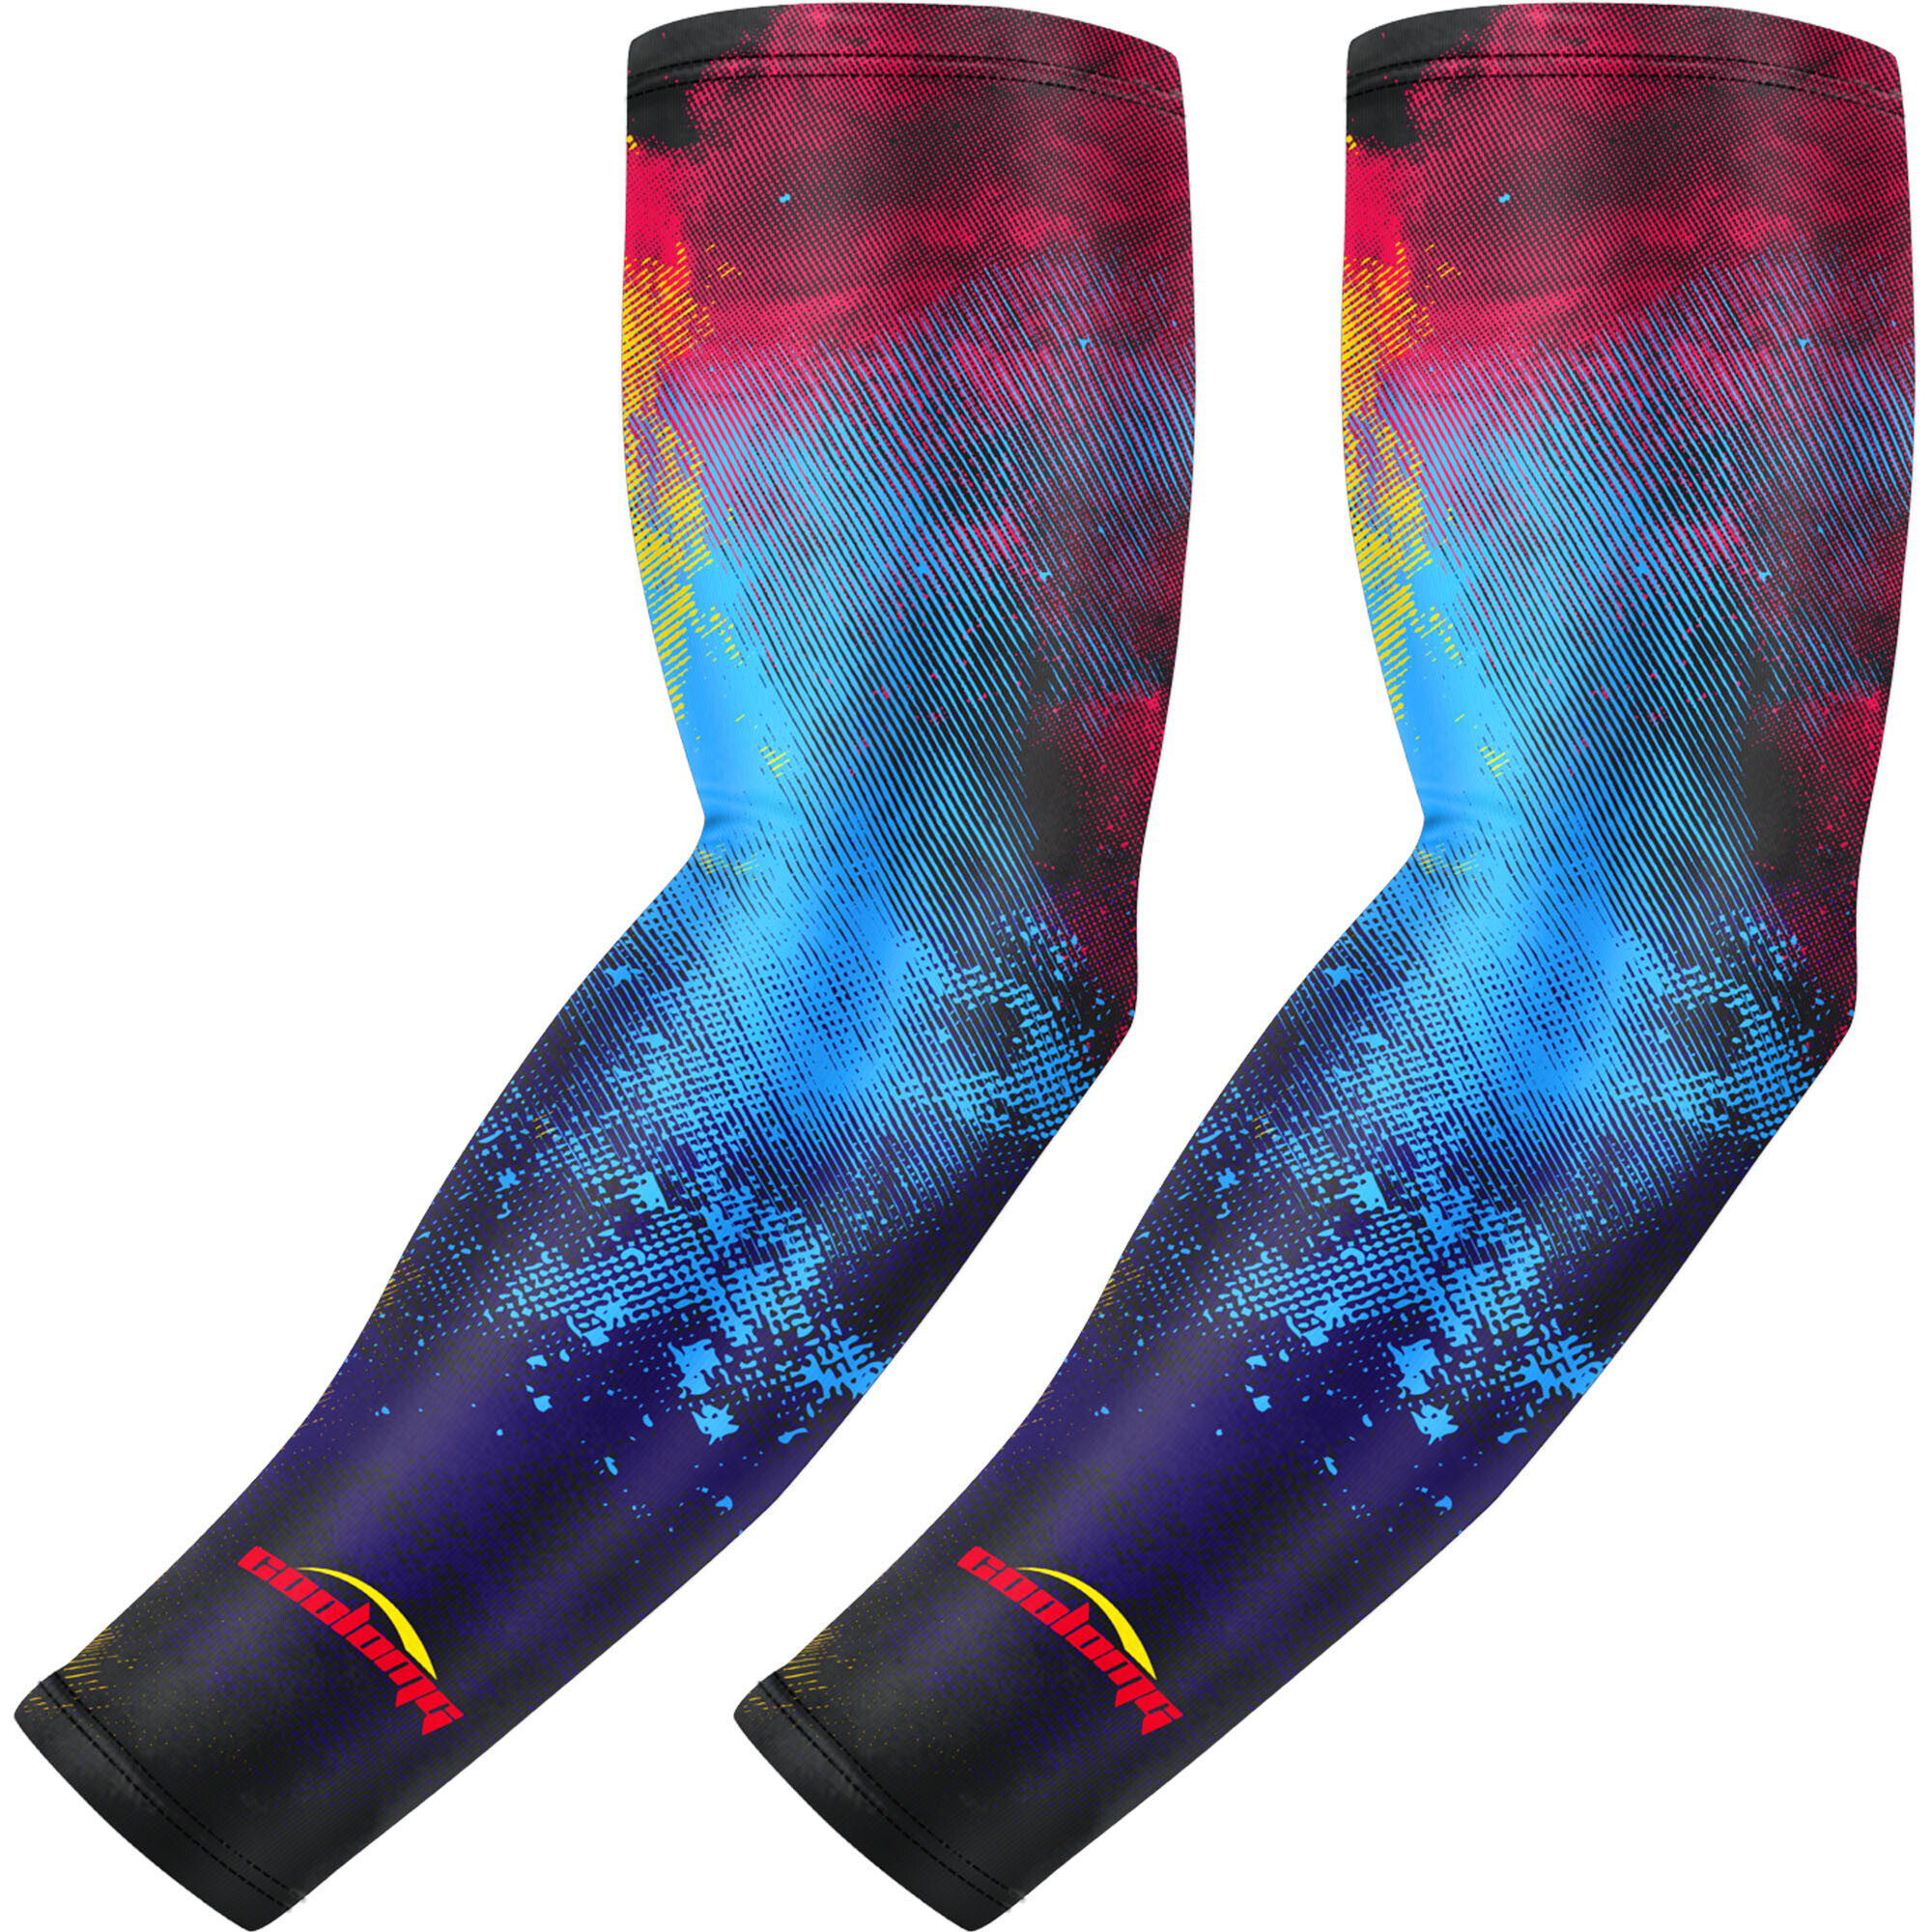 Compression Arm Sleeves for Basketball Football Baseball and Other Activities COOLOMG 30+ Colors,Youth /& Adult 1 Pair